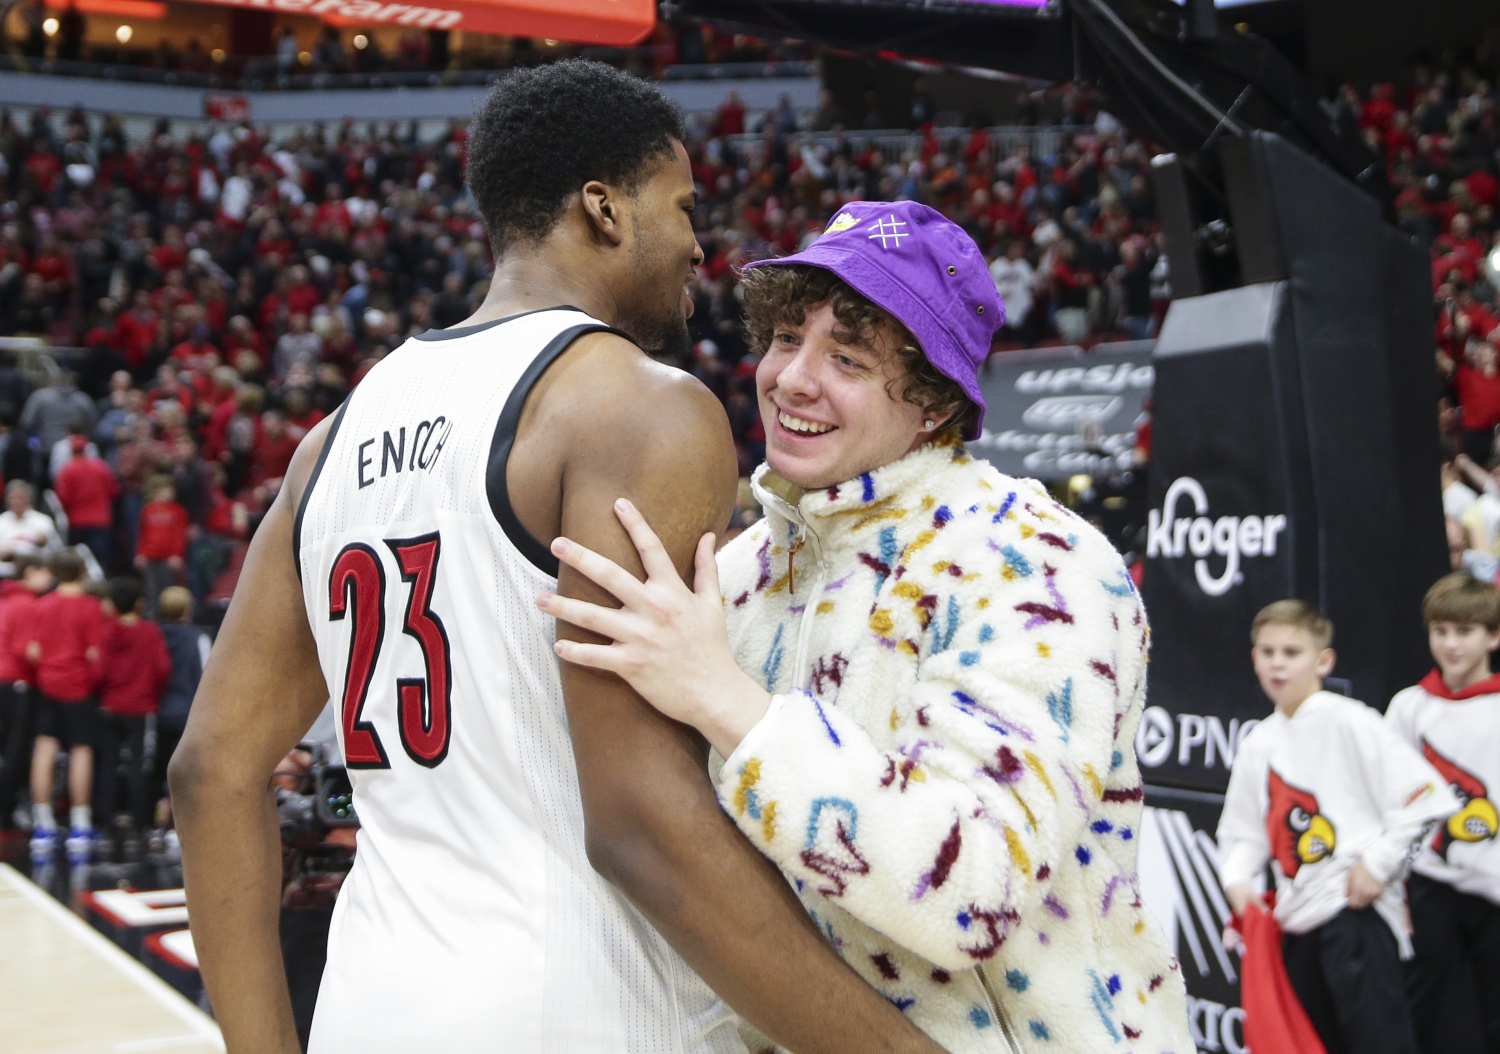 Steven Enoch #23 of the Louisville Cardinals celebrates with recording artist Jack Harlow after defeating the Virginia Cavaliers at KFC YUM! Center on February 08, 2020 in Louisville, Kentucky.